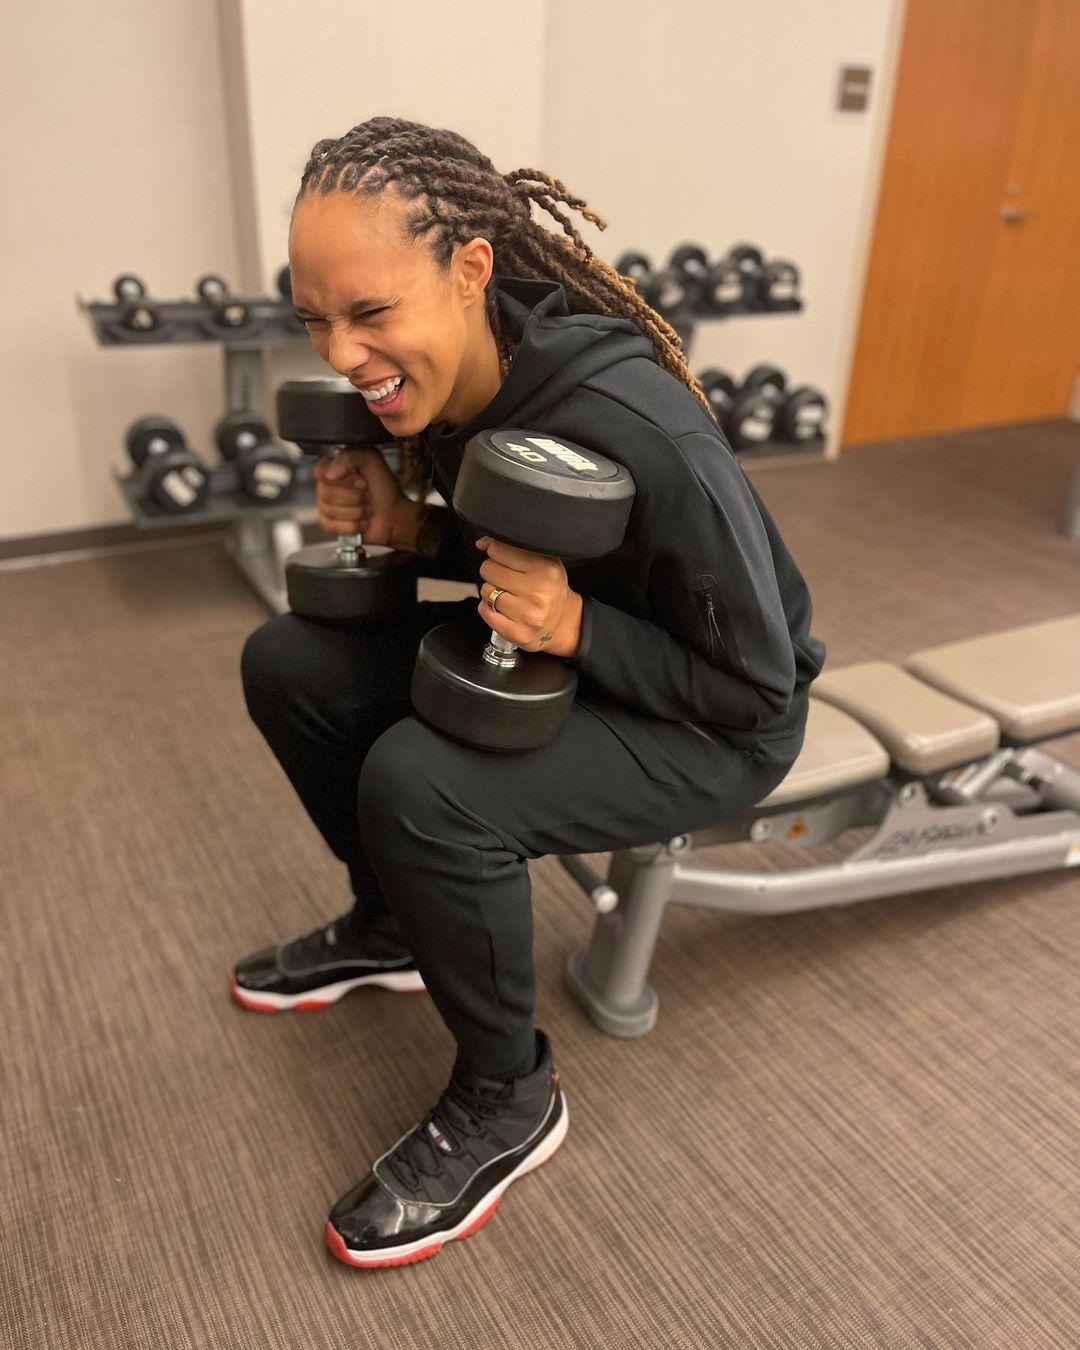 Brittney Griner working out